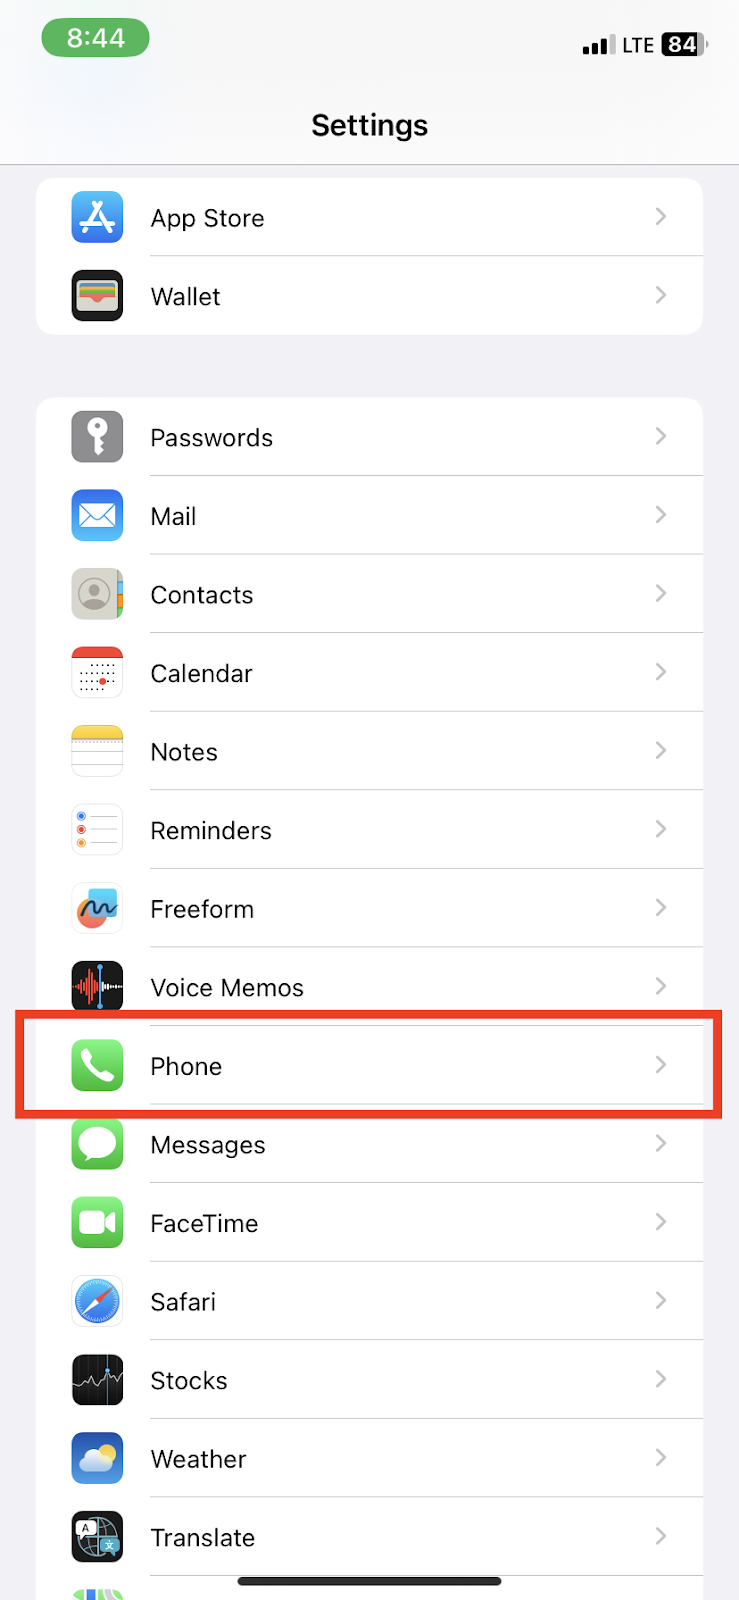 Scroll down to find the Phone settings.